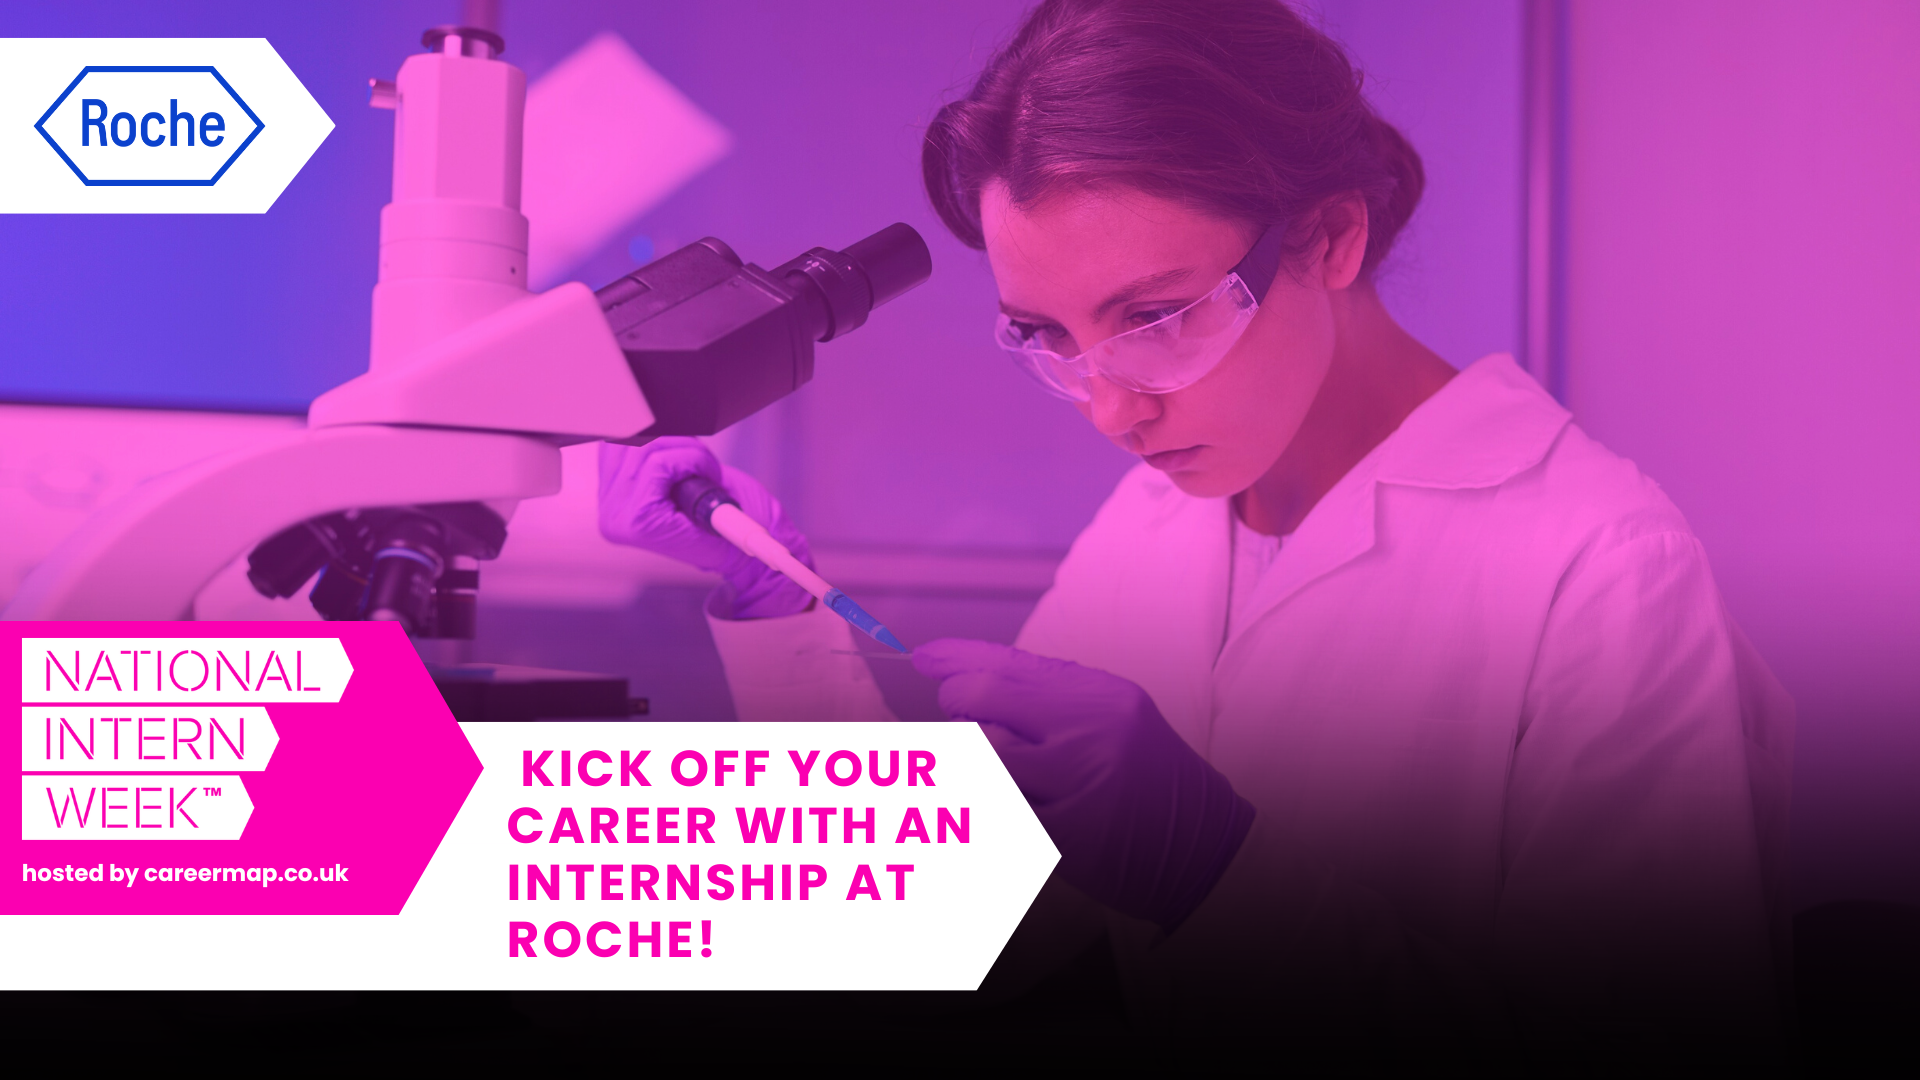 Roche: Kick off your career with an internship at Roche! | NIW 2023